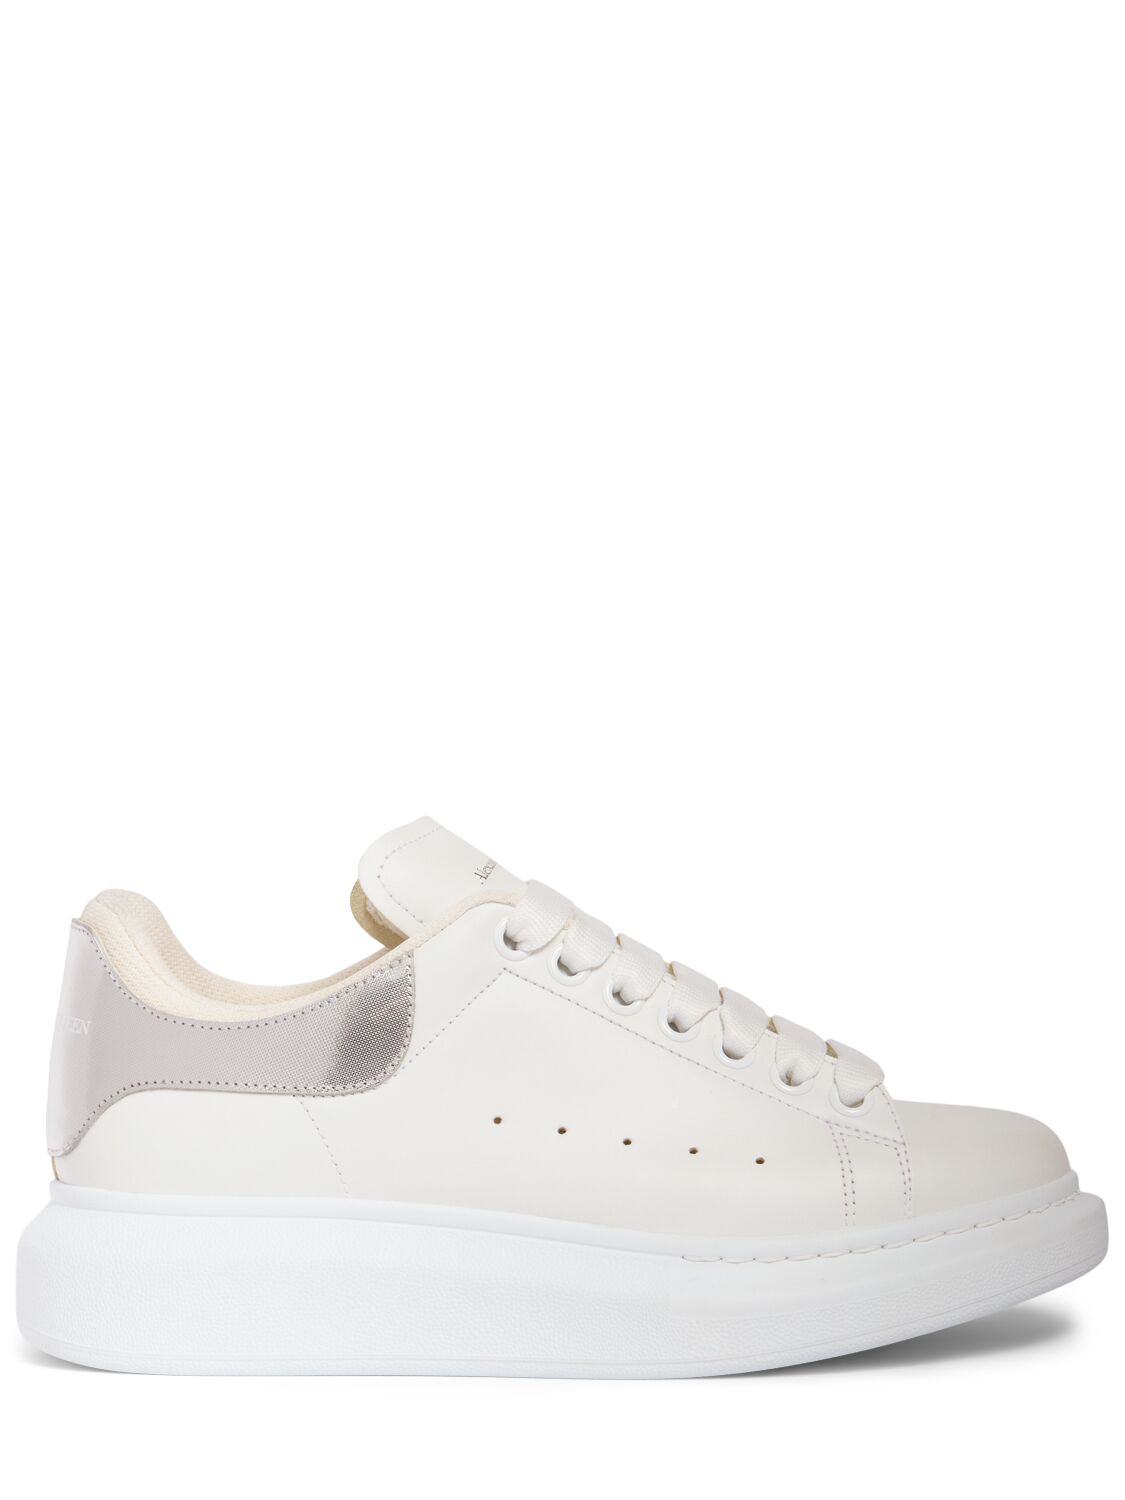 Alexander Mcqueen 45mm Leather Sneakers In White/silver